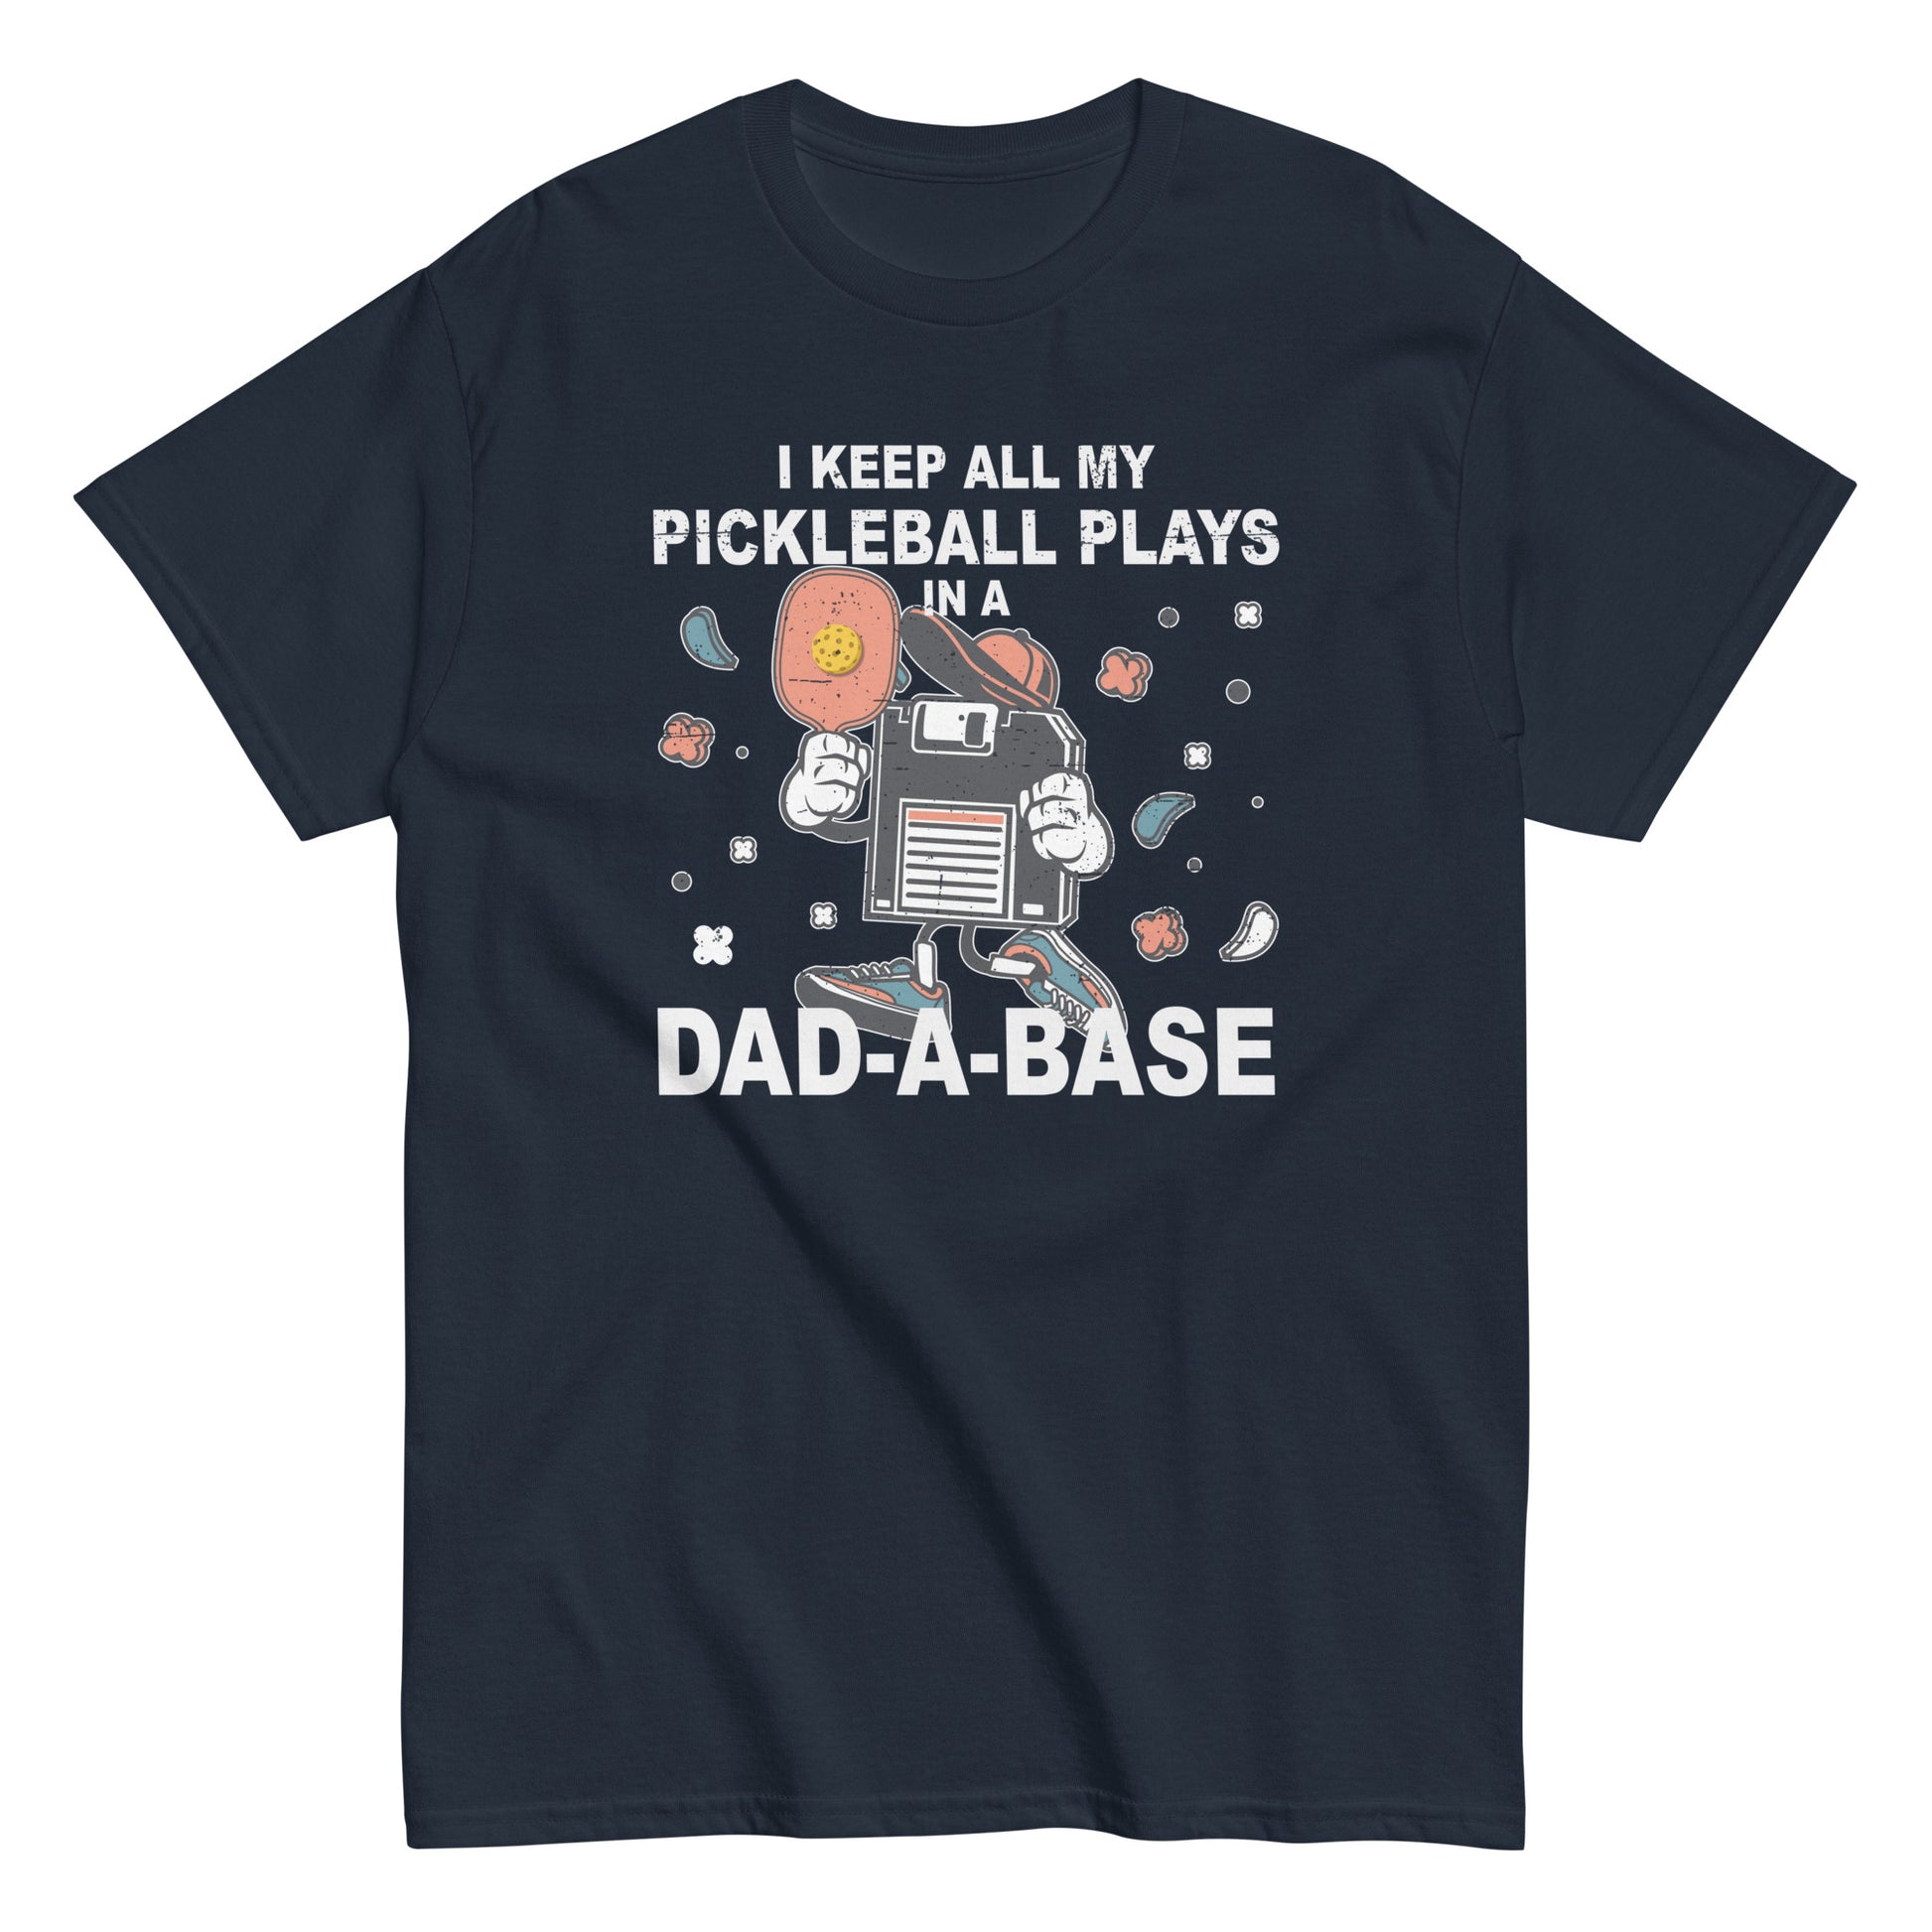 Retro Pickleball Pun: "I Keep All My Pickleball Plays In A Dad-A-Base", Father's Day Mens Navy T-Shirt